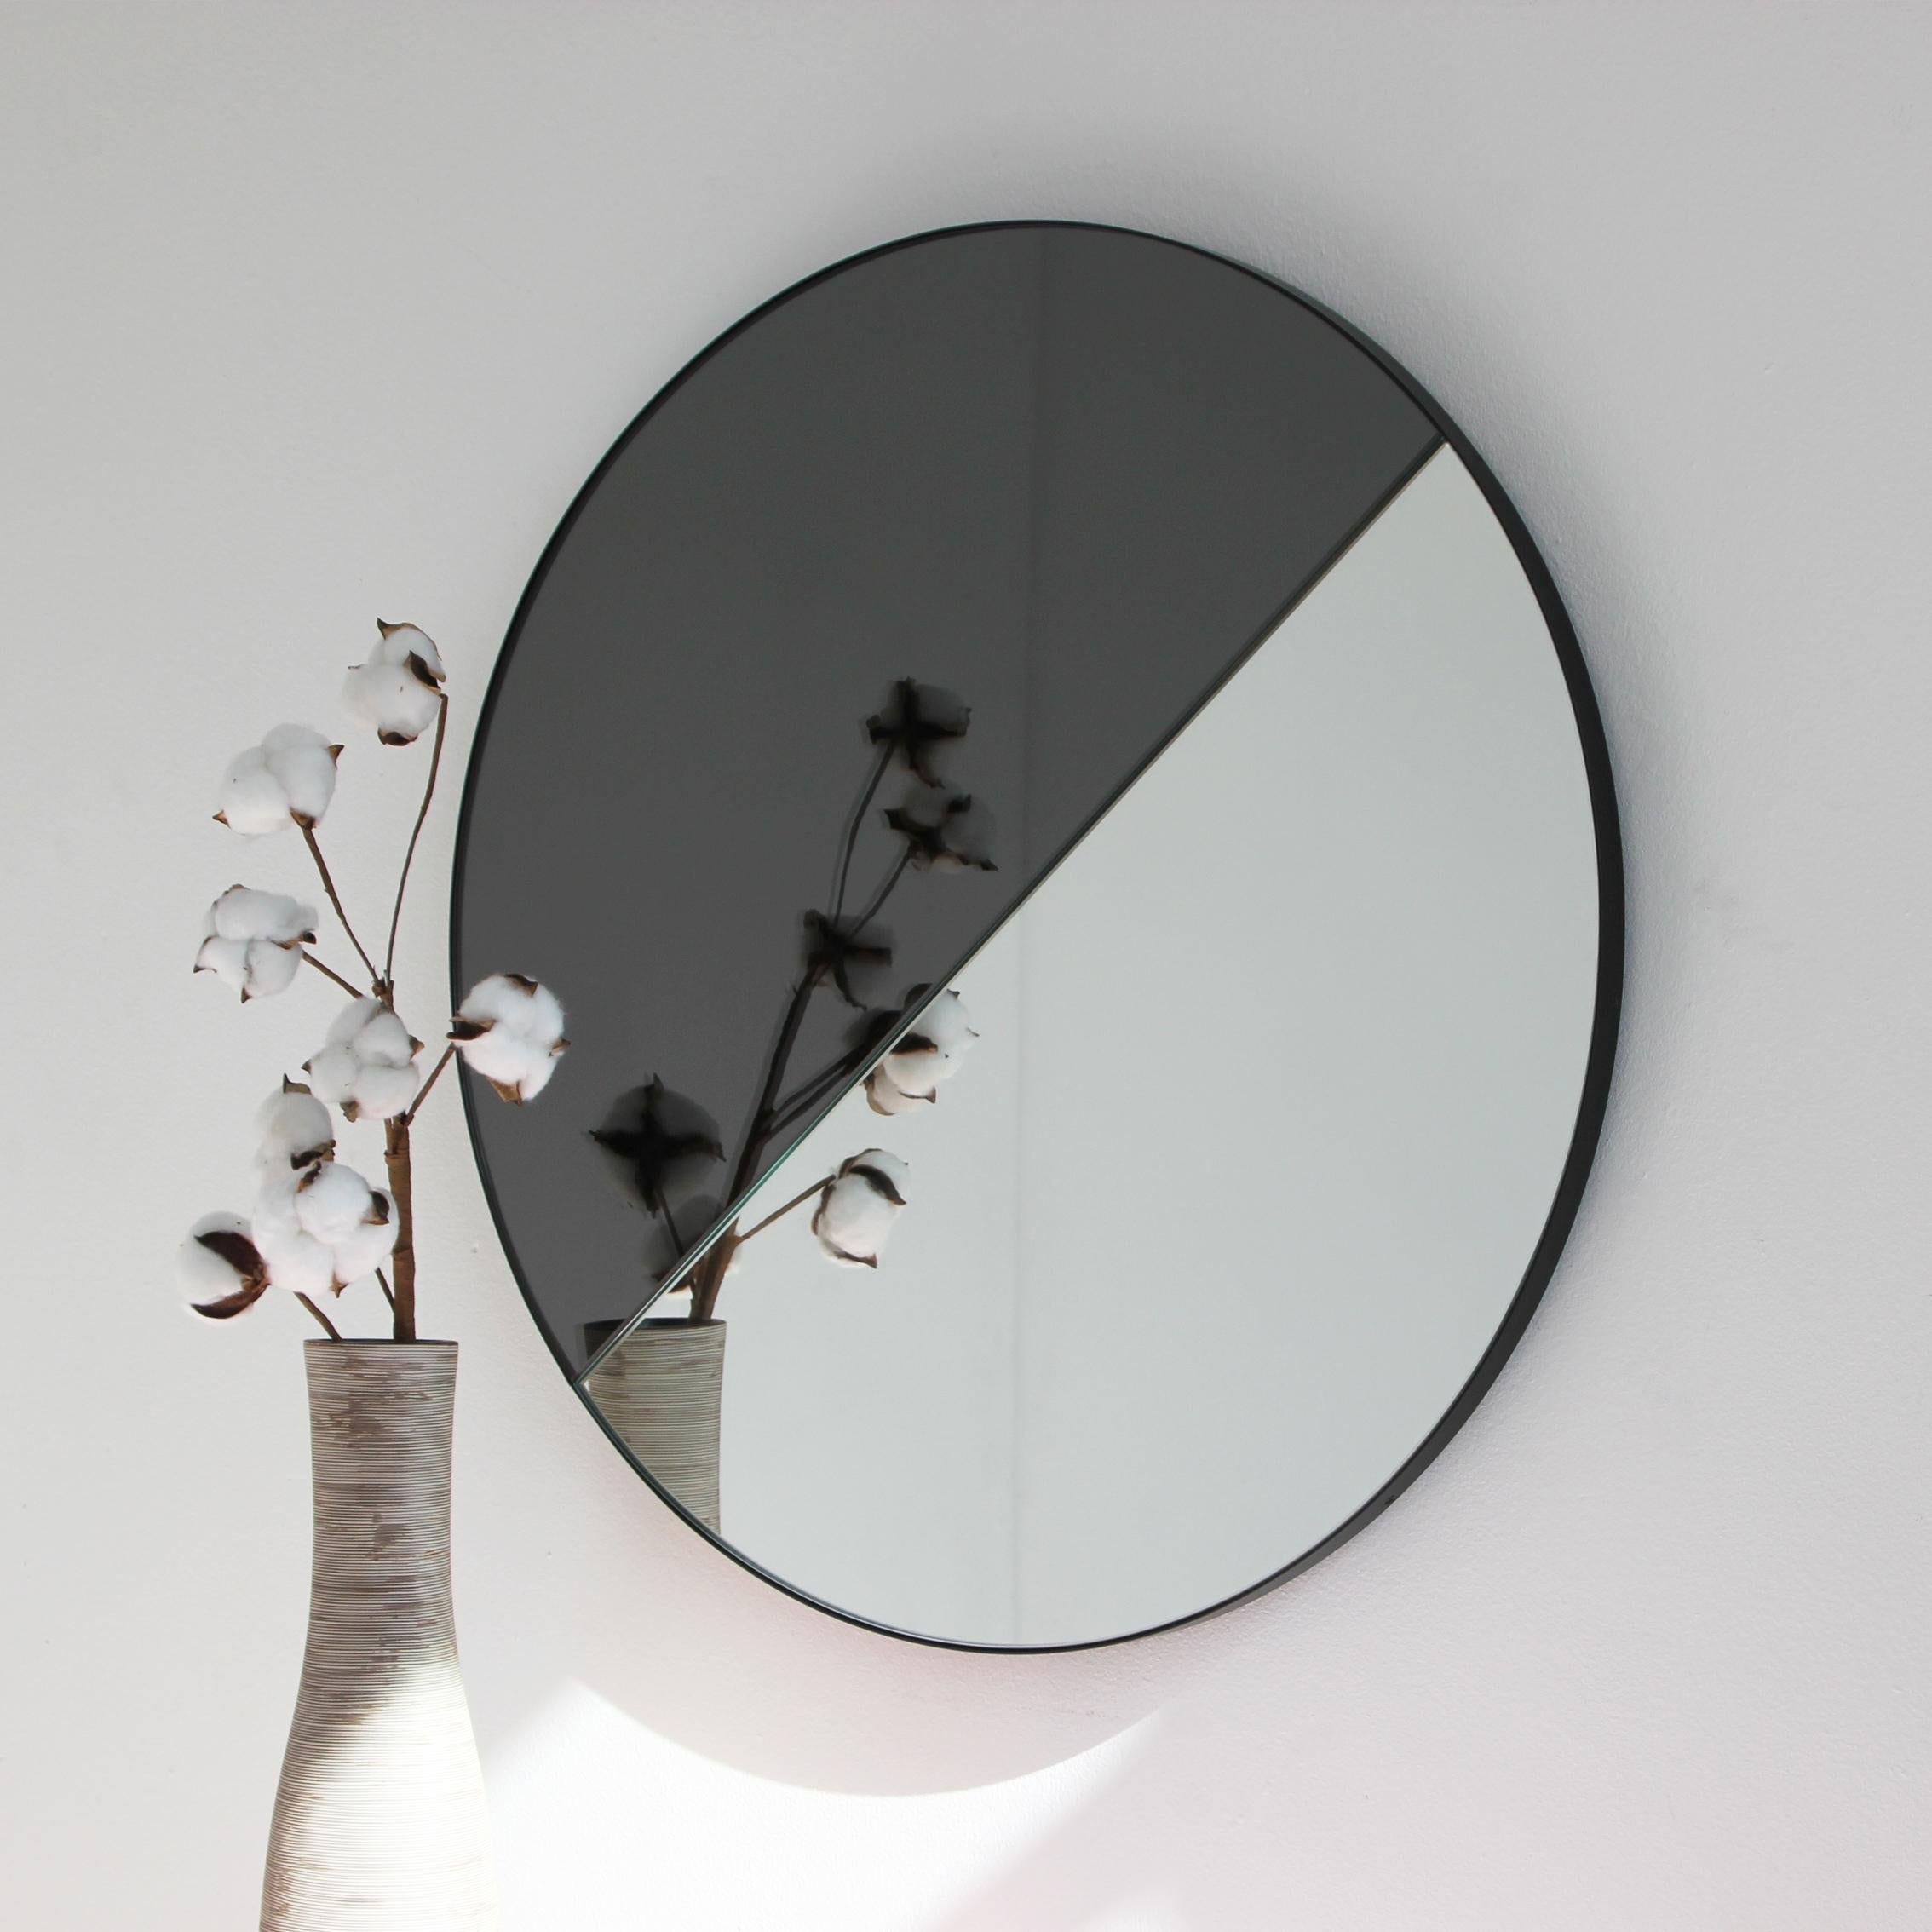 Contemporary mixed tinted (black & silver) round mirror with an elegant black frame. Designed and handcrafted in London, UK.

All mirrors are fitted with an ingenious French cleat (split batten) system so they may hang flush with the wall in four